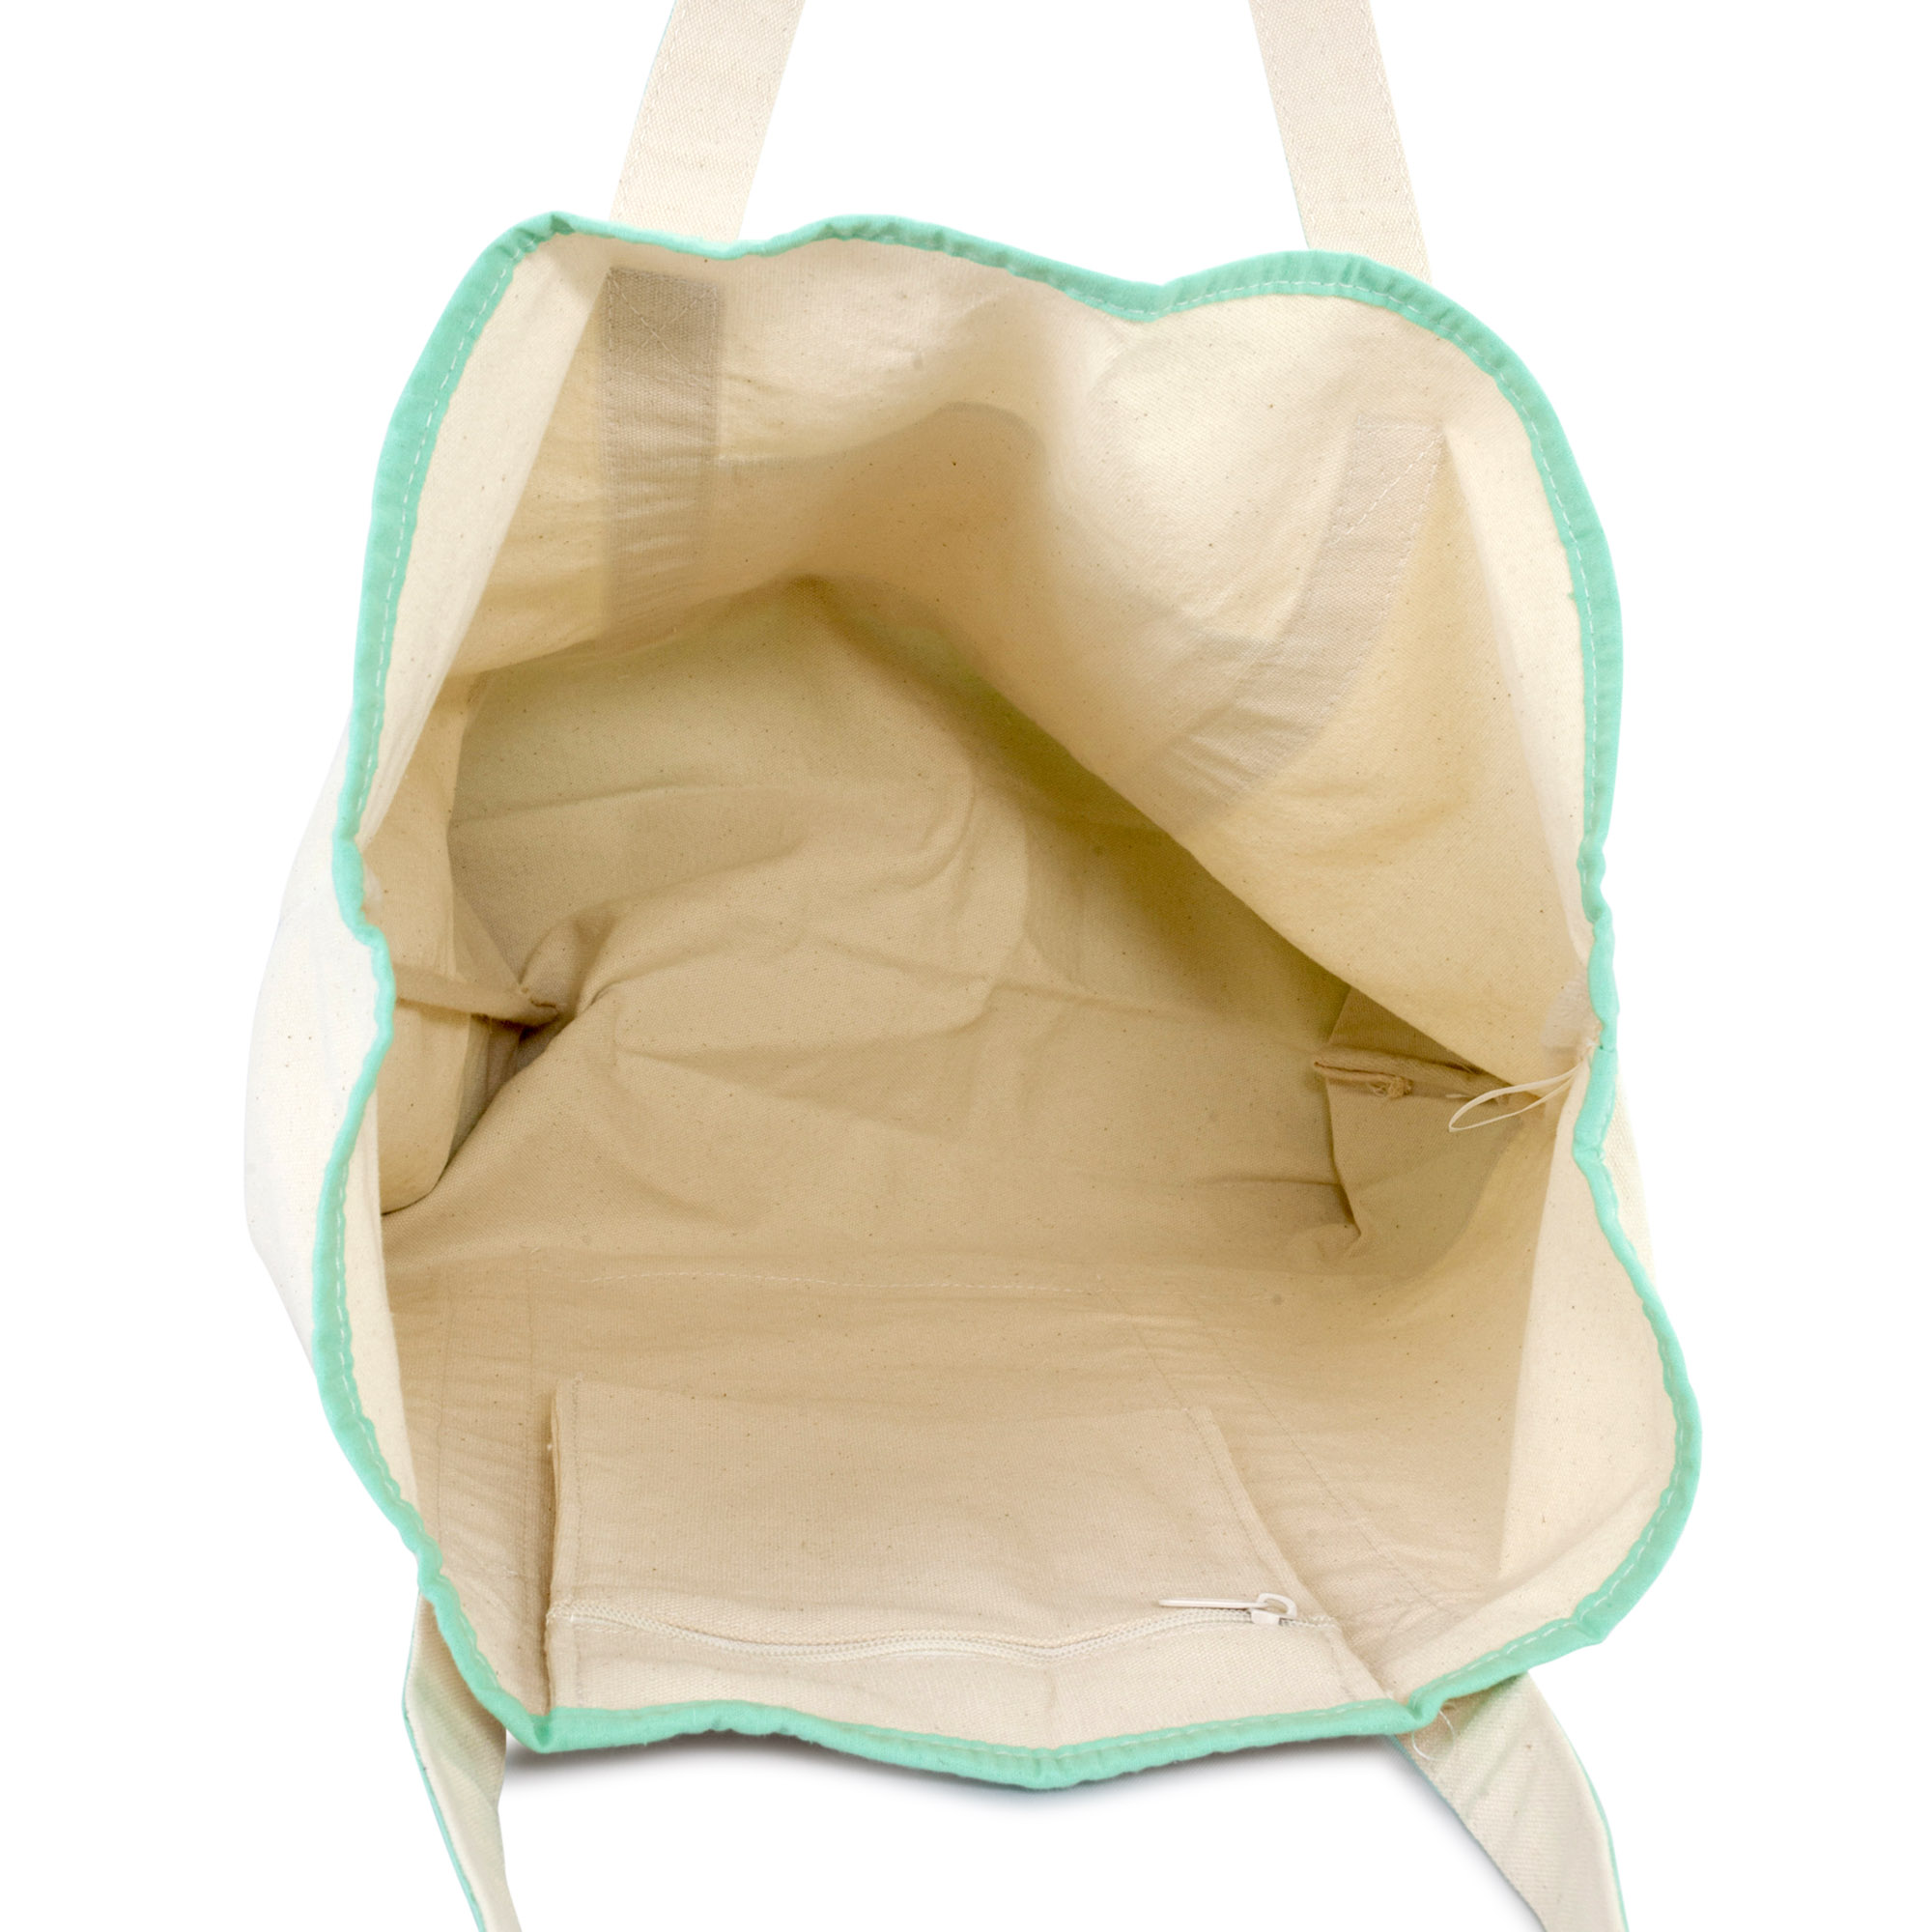 DALIX 22" Open Top Deluxe Tote Bag with Outer Pocket in Mint Green - image 4 of 5